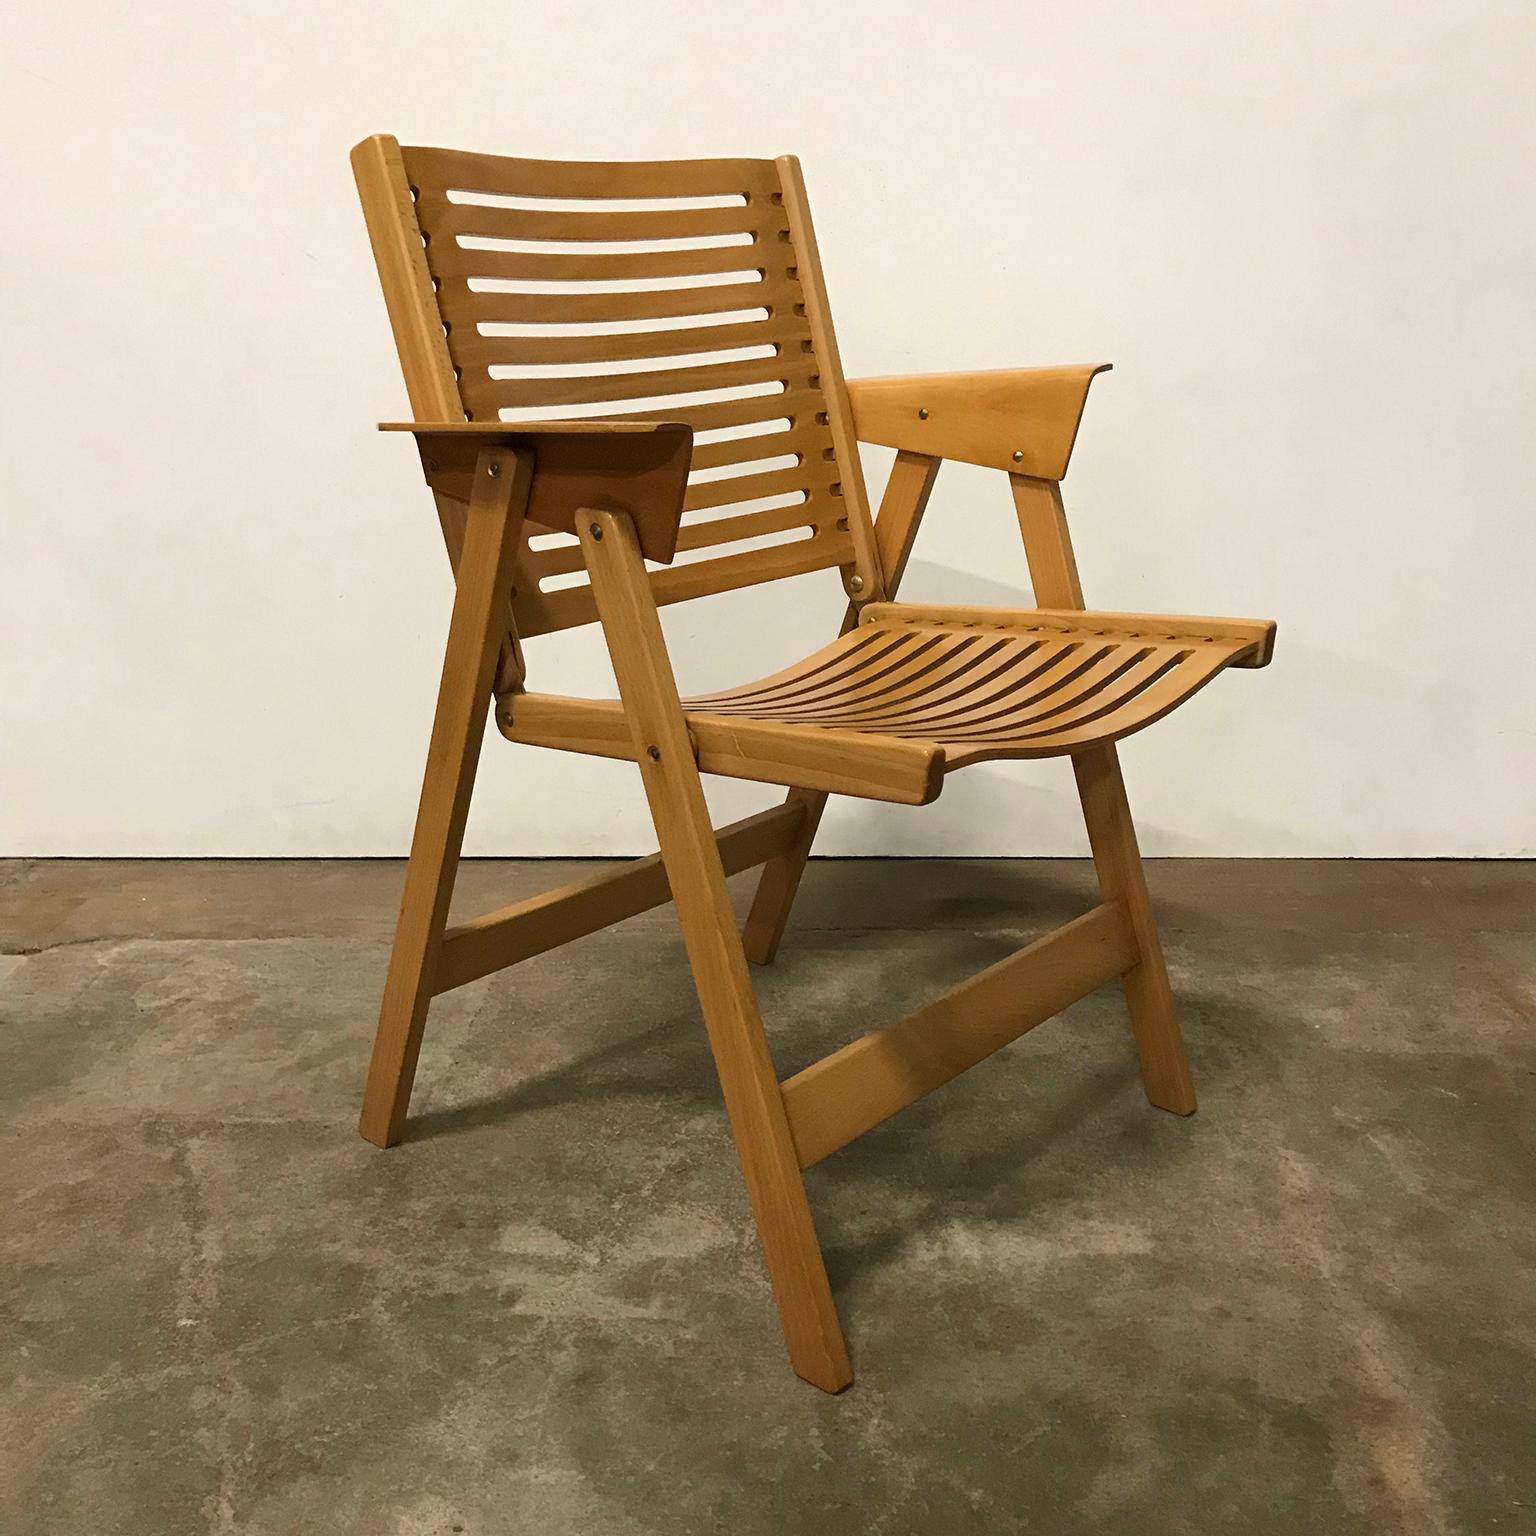 Set of four Kralj chairs. Beautiful elegant designed folding chairs. The condition is quite good, except for some scratches (#15, #16), some tiny chips off (#17) and some stains/ stripes of black (#18).
Note that these are the Kralj chairs, what